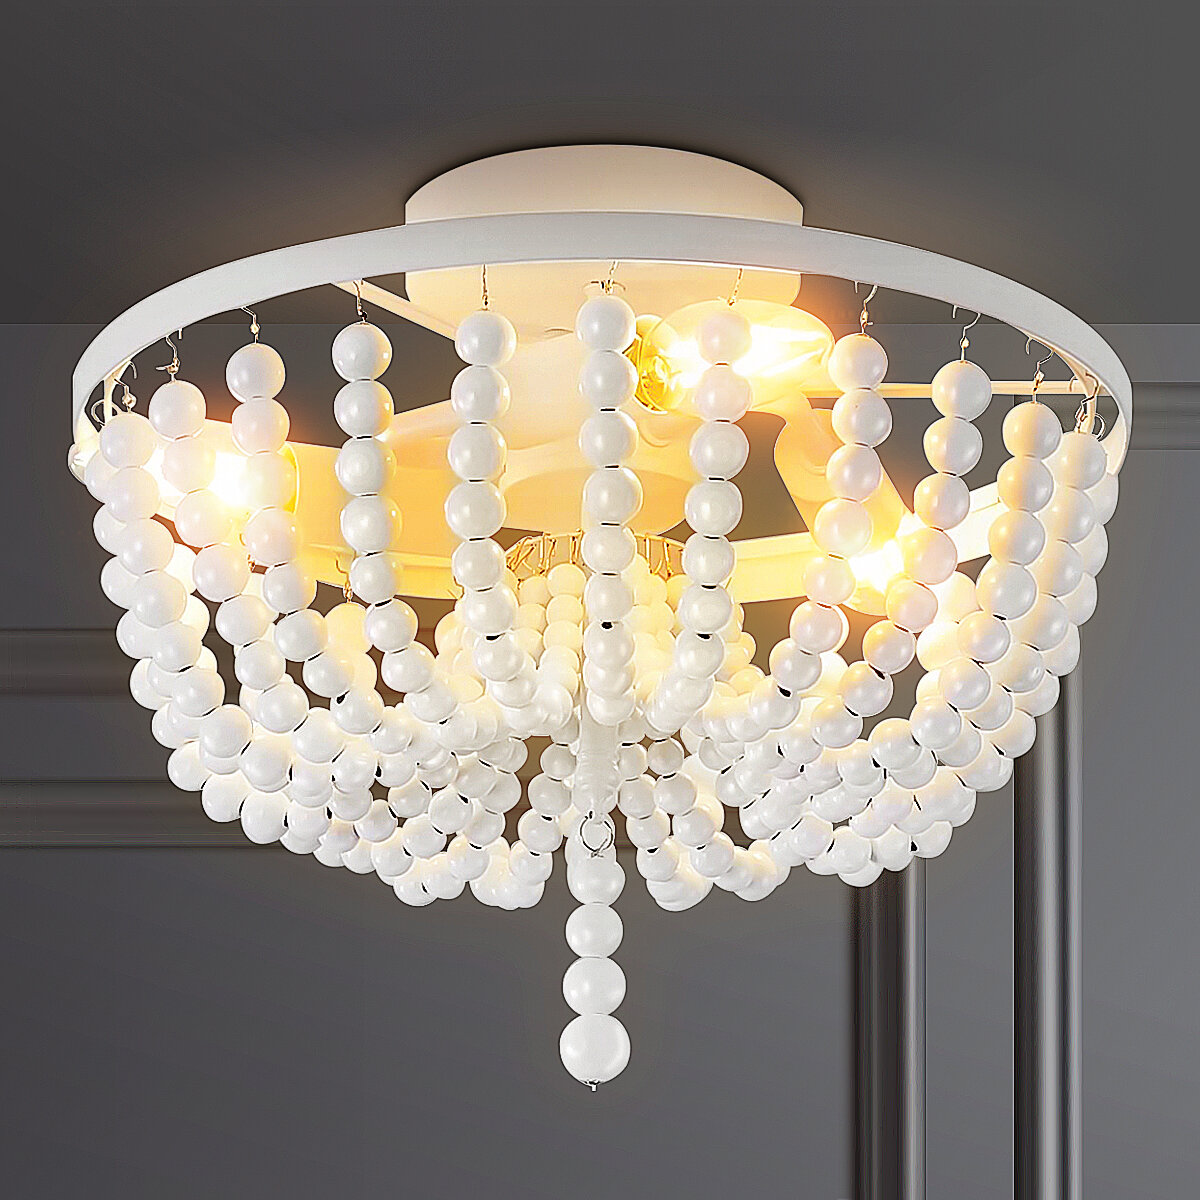 Image of Wooden Bead Chandelier Lighting Fixture Retro Wood Ceiling Pendant Light White Without Bulbs